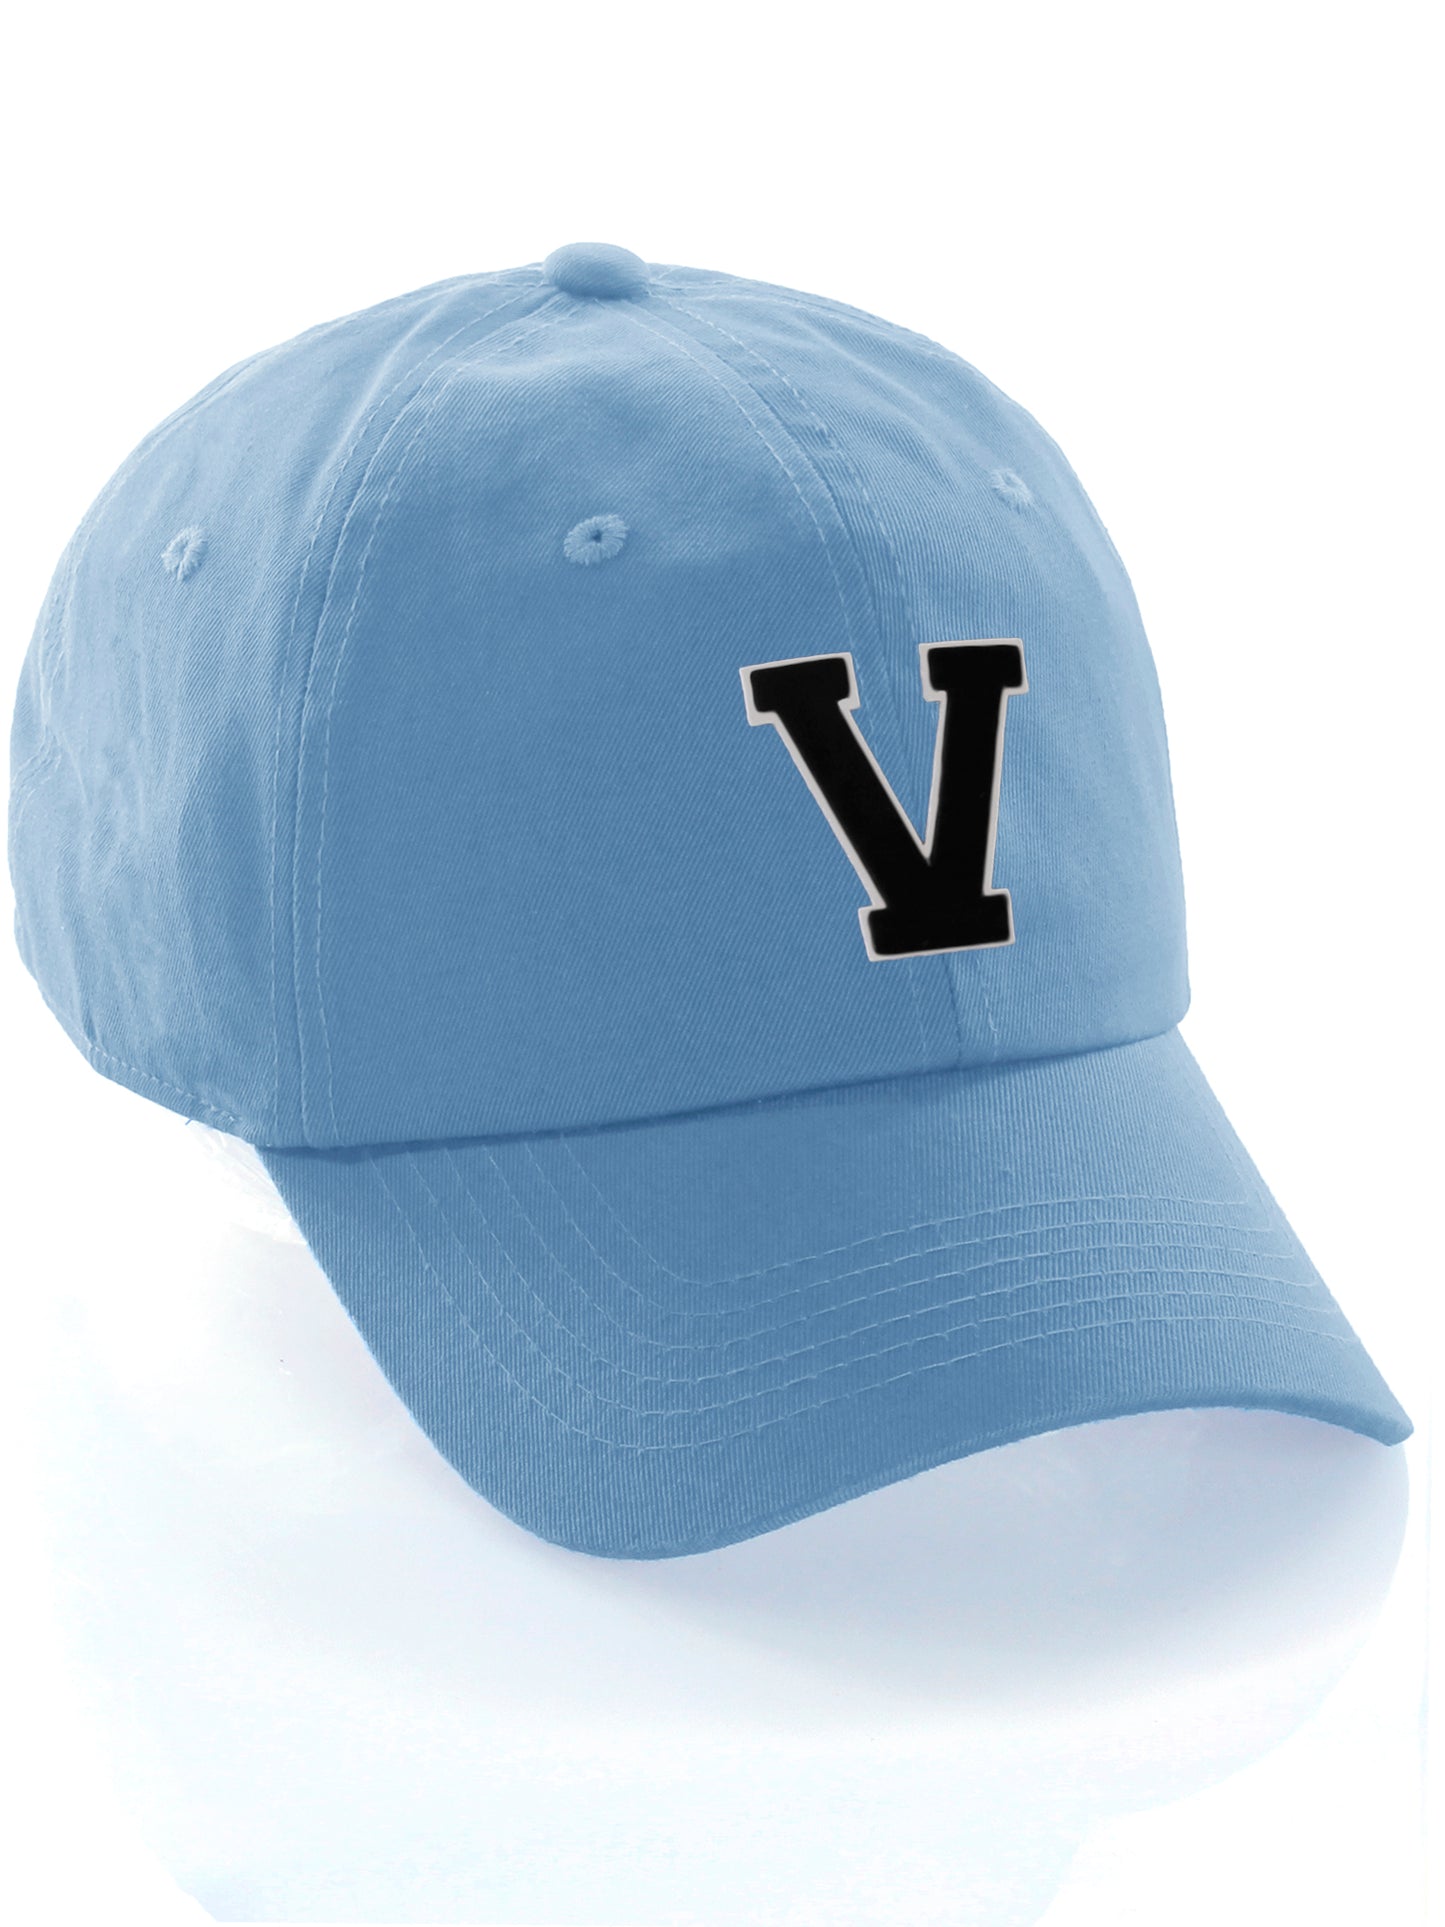 Customized Letter Initial Baseball Hat A to Z Team Colors, Sky Cap White Black